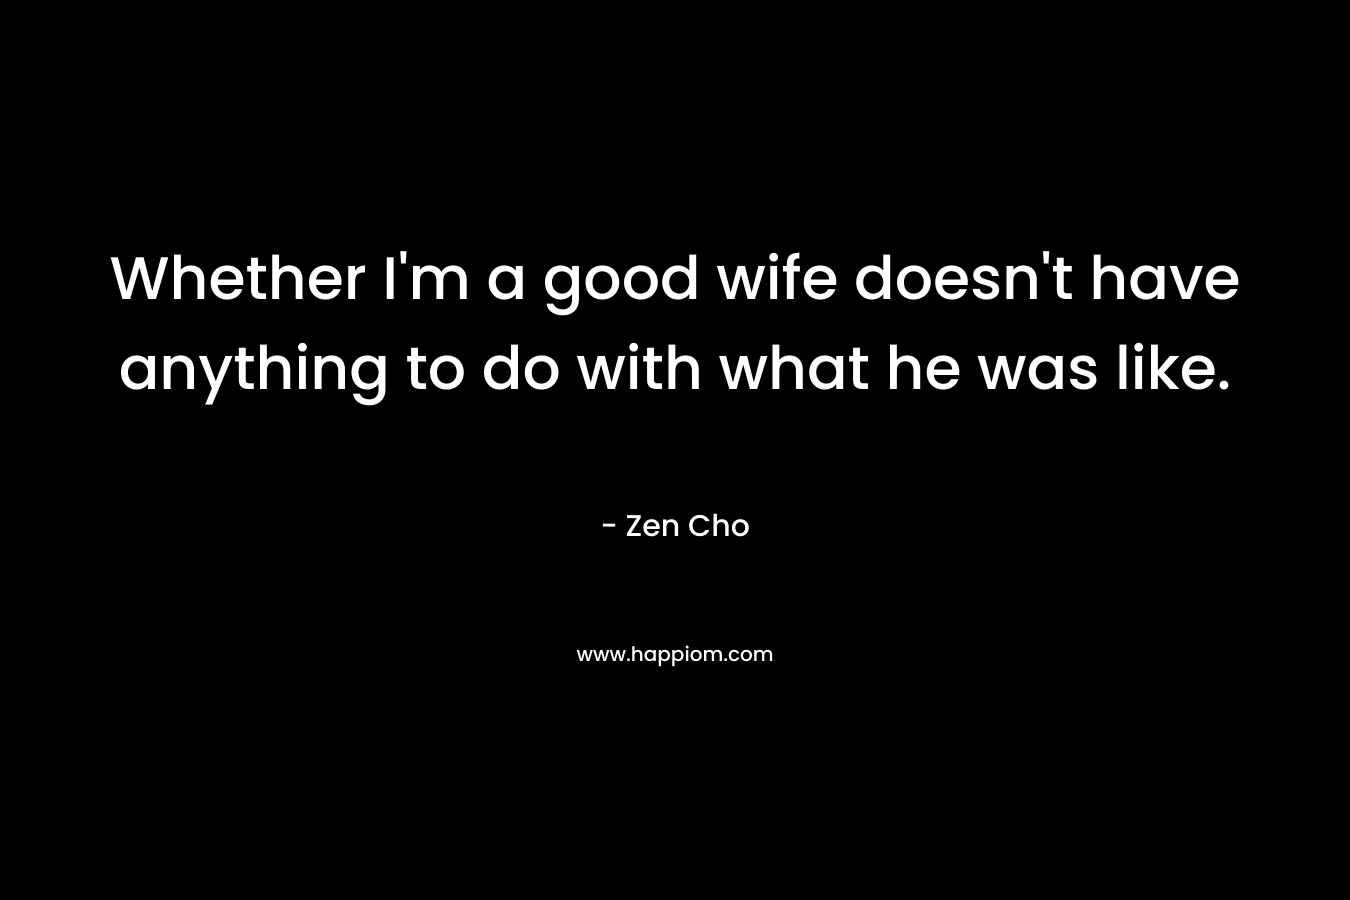 Whether I’m a good wife doesn’t have anything to do with what he was like. – Zen Cho